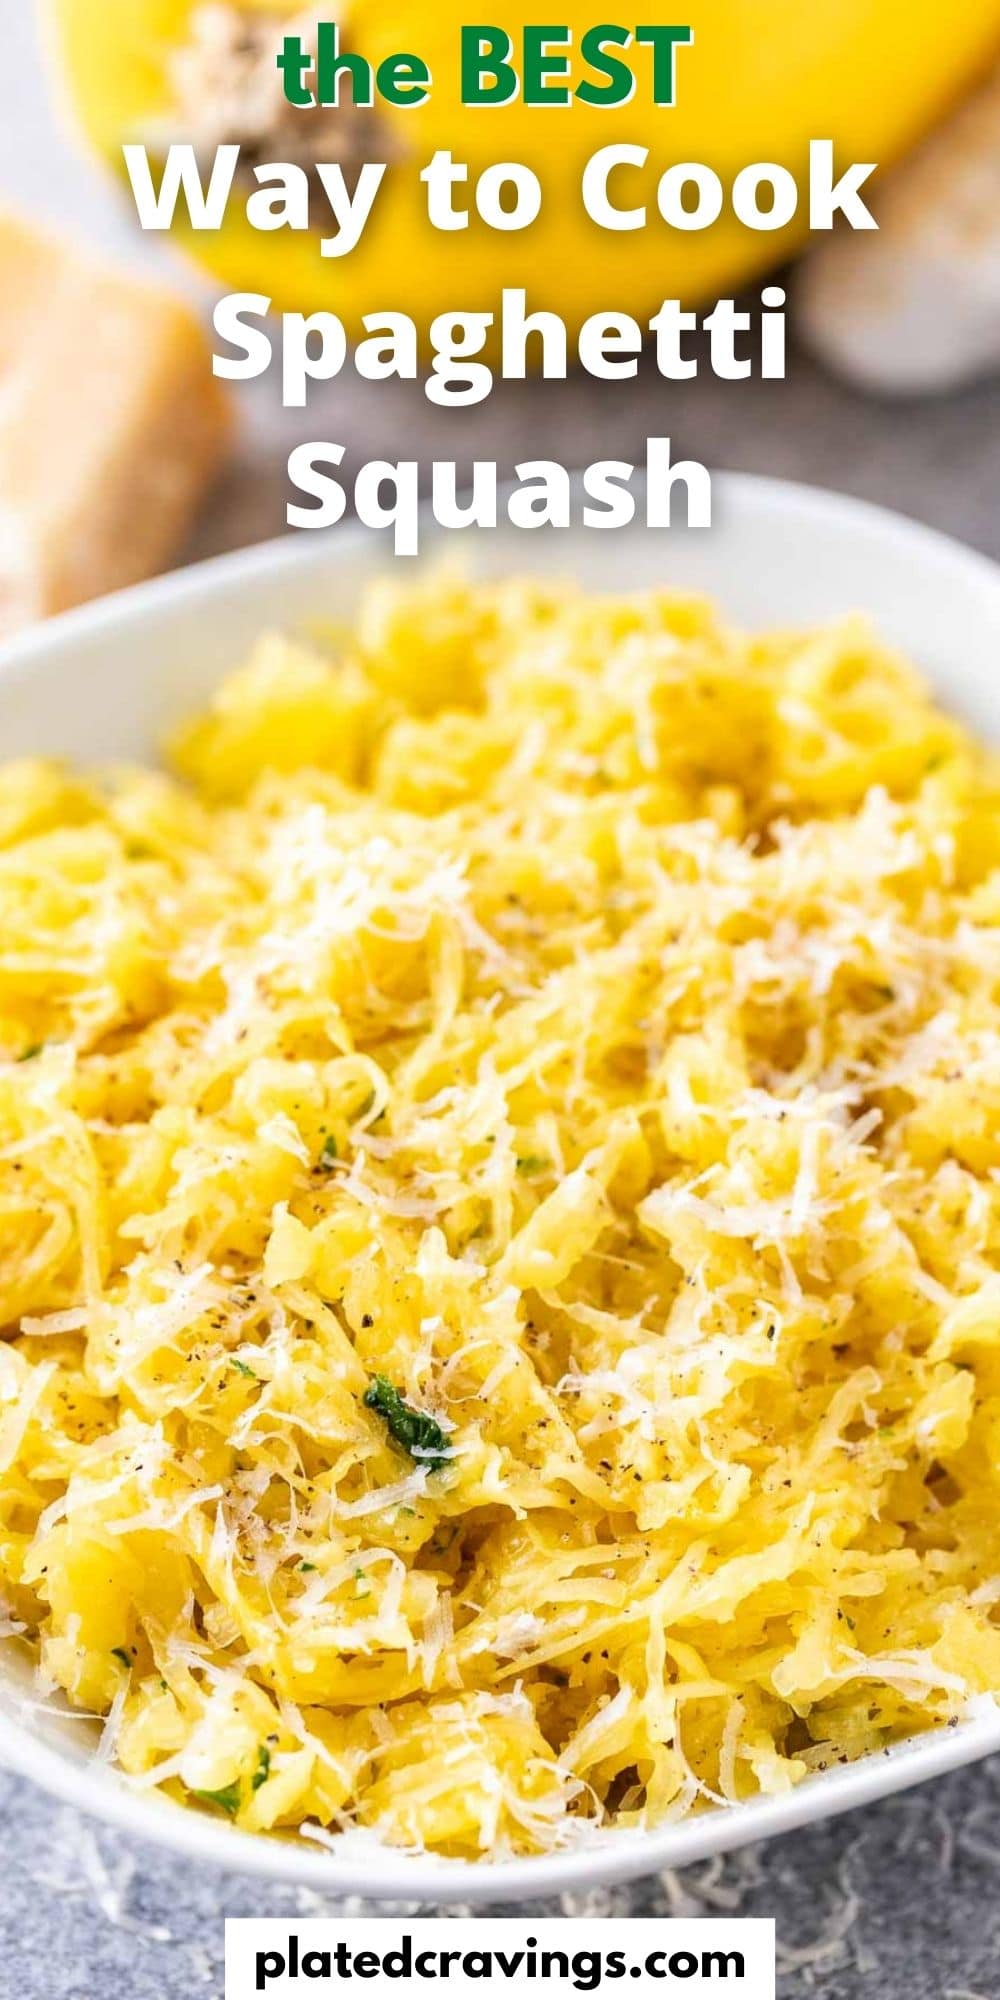 Oven Roasted Spaghetti Squash - Plated Cravings